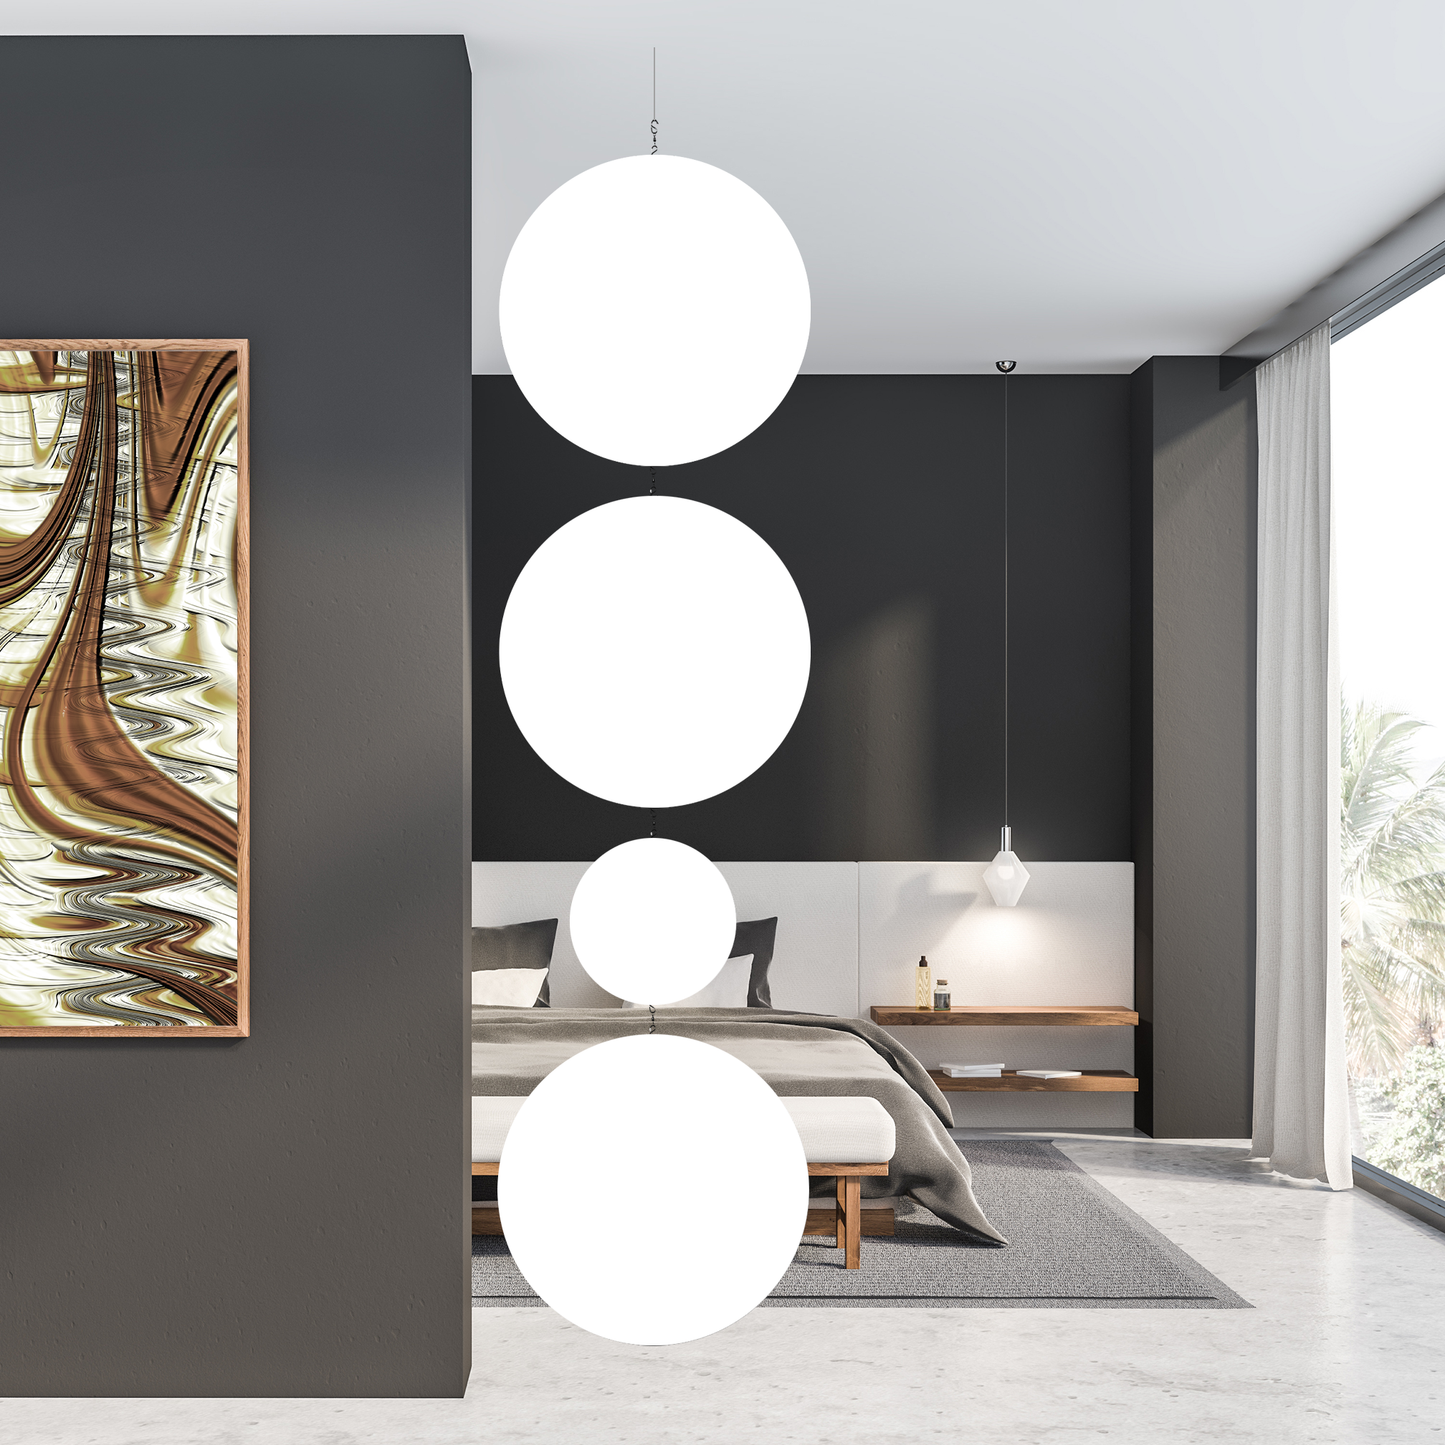 White BOLD XL dramatic kinetic hanging art mobile in modern white black and gray bedroom, with framed abstract art - large mobile by AtomicMobiles.com